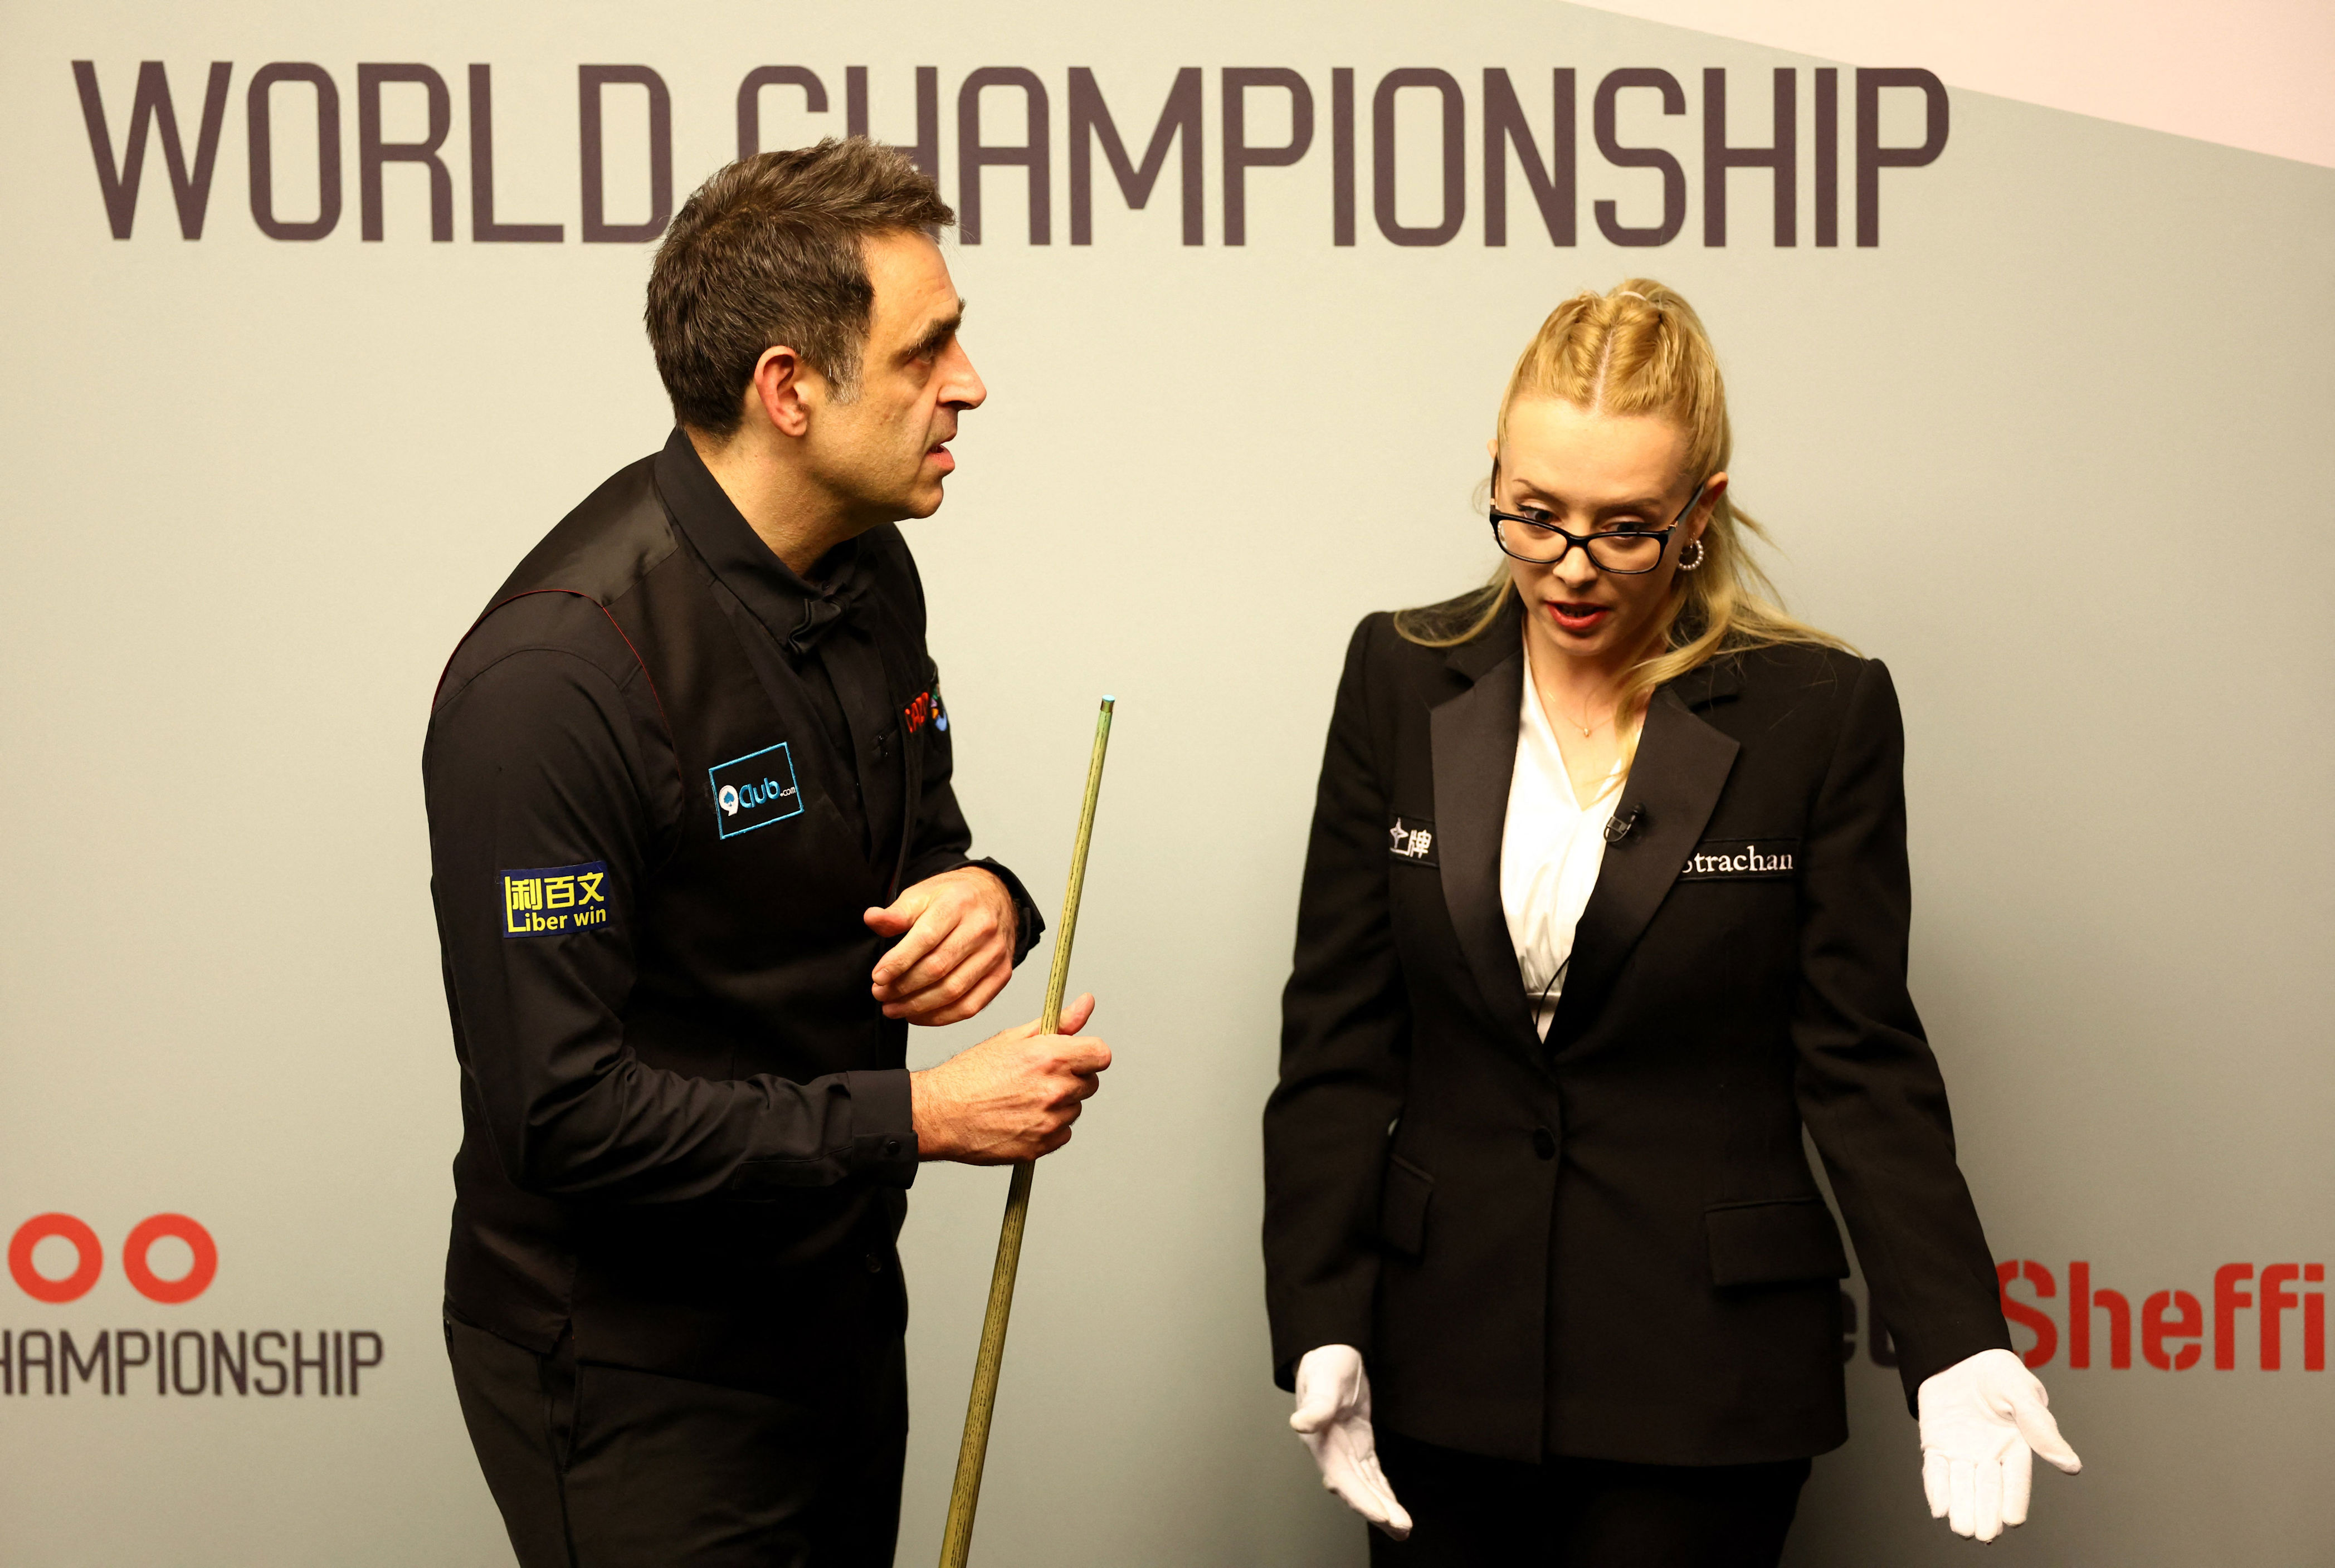 ronnie o’sullivan shows ‘unbelievable’ sportsmanship in incident at world snooker championship